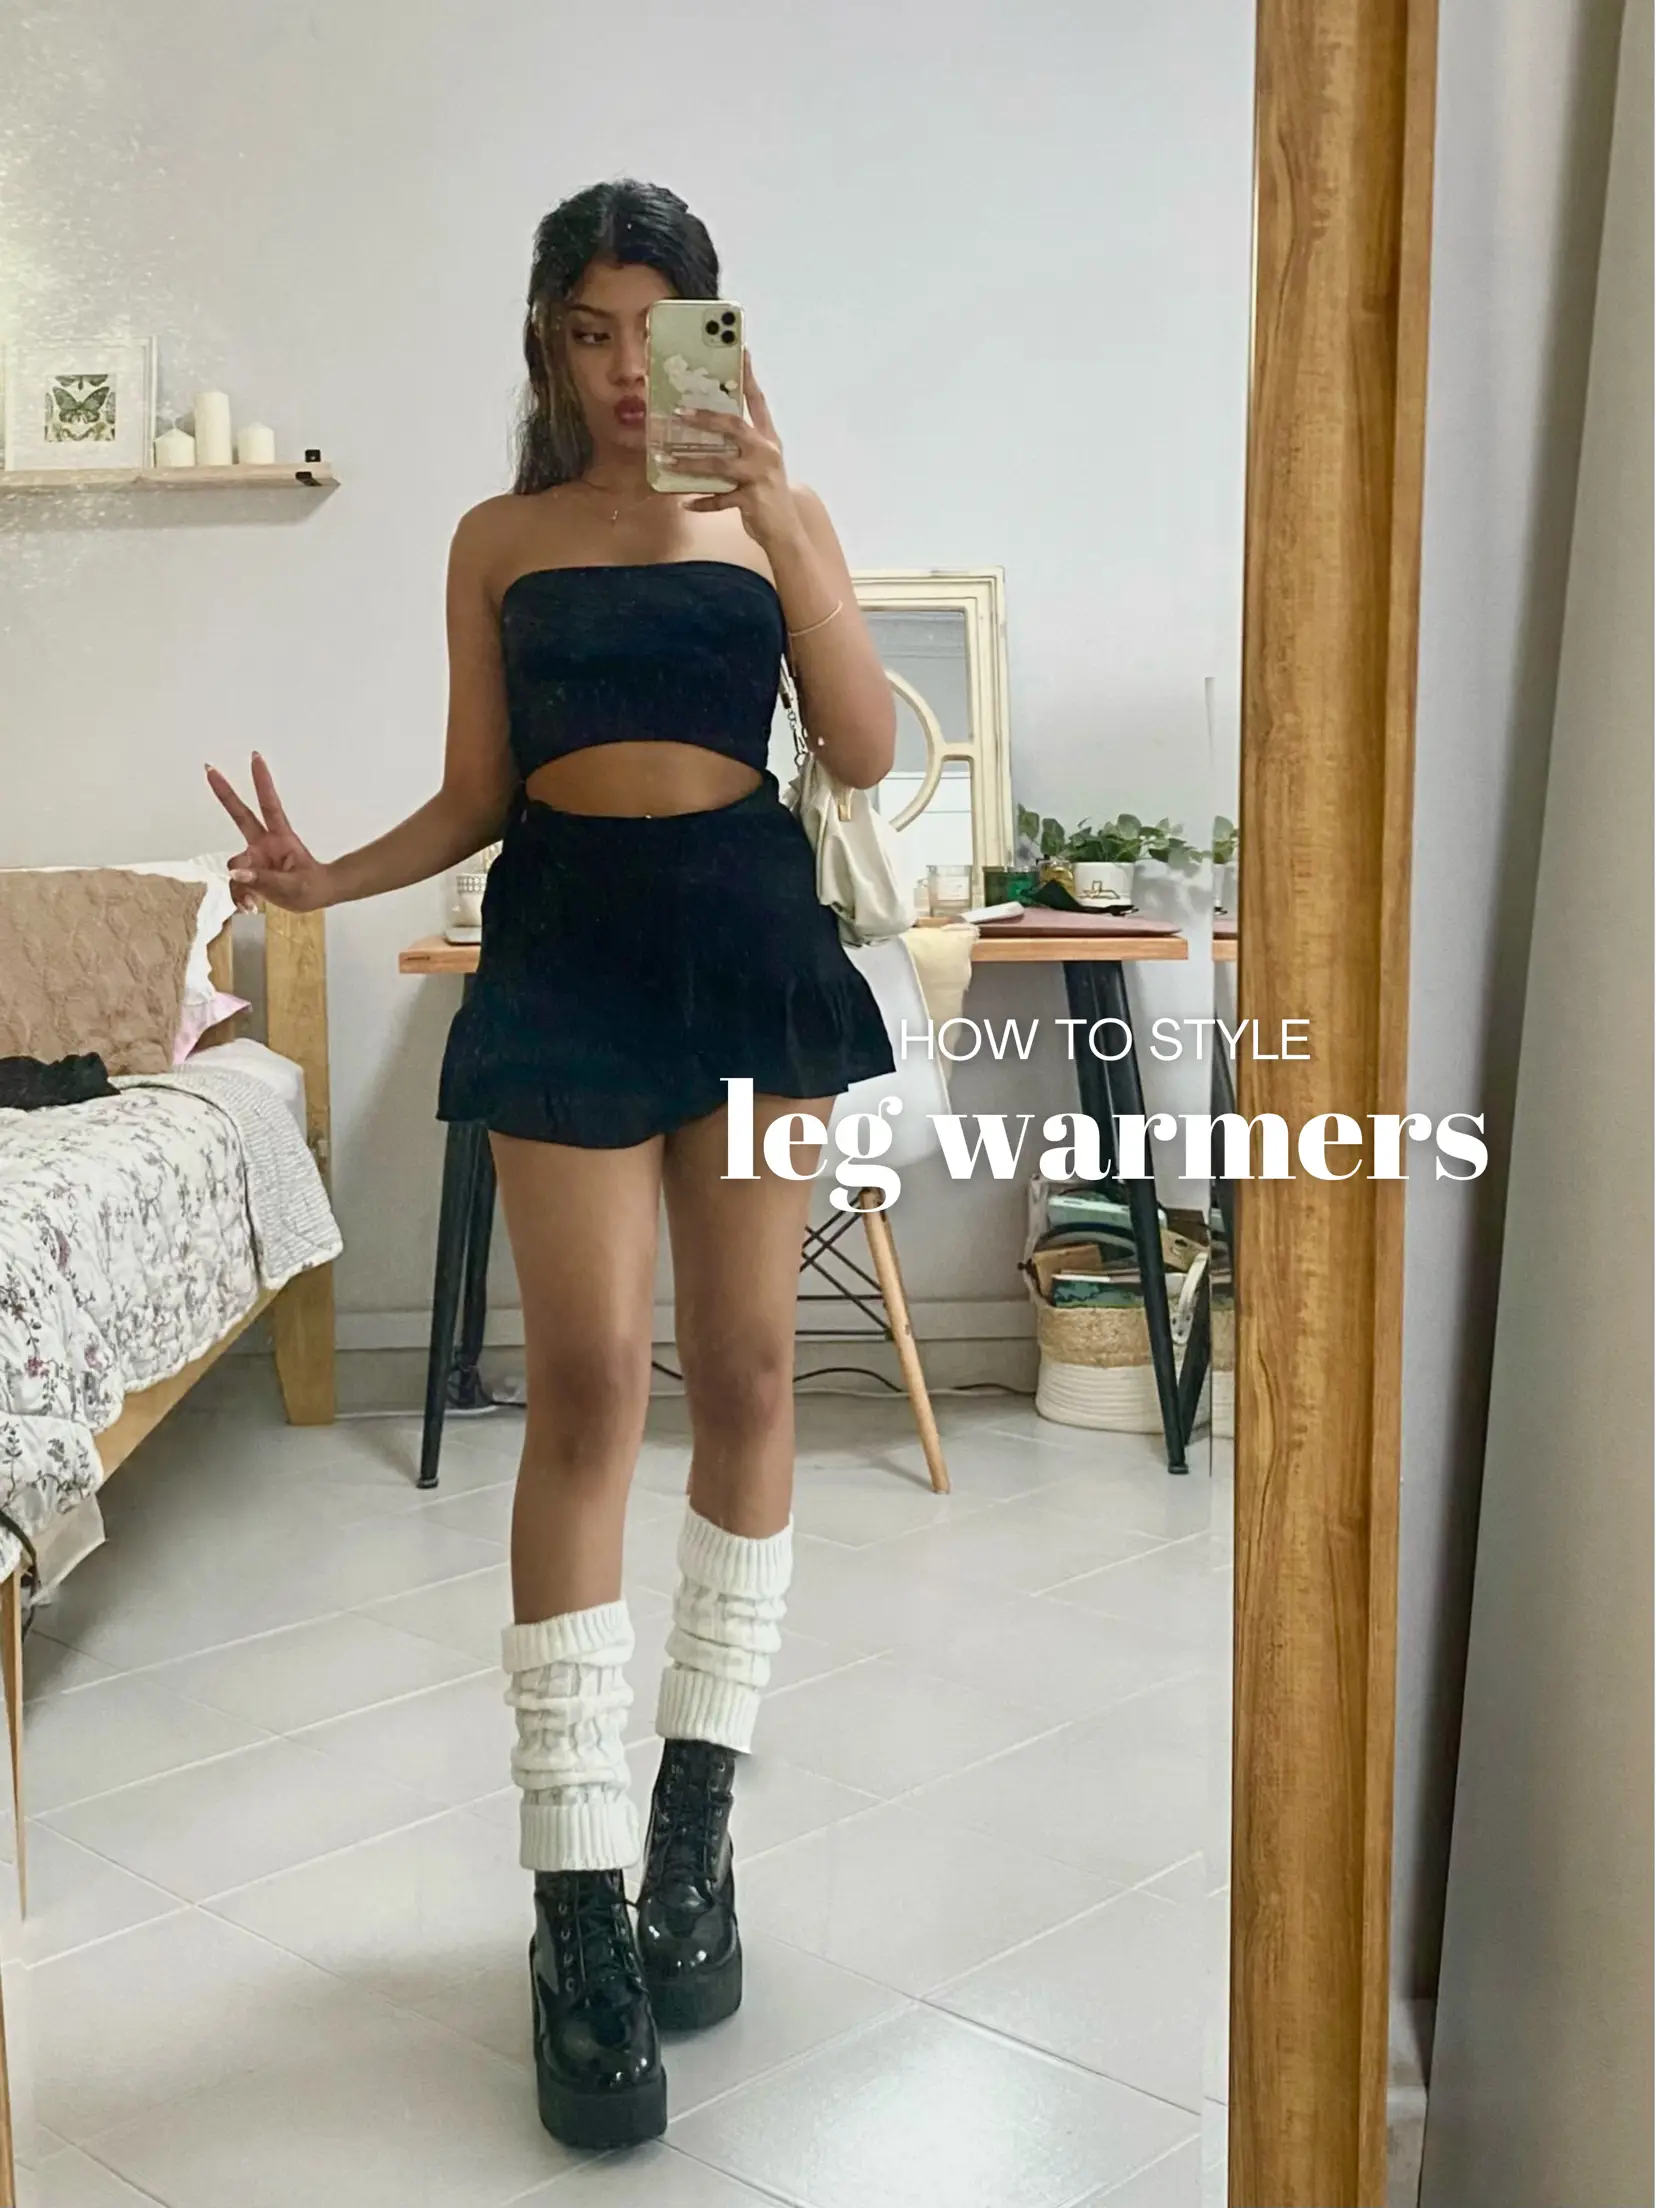 How to style leg warmers, Gallery posted by sandraclaire